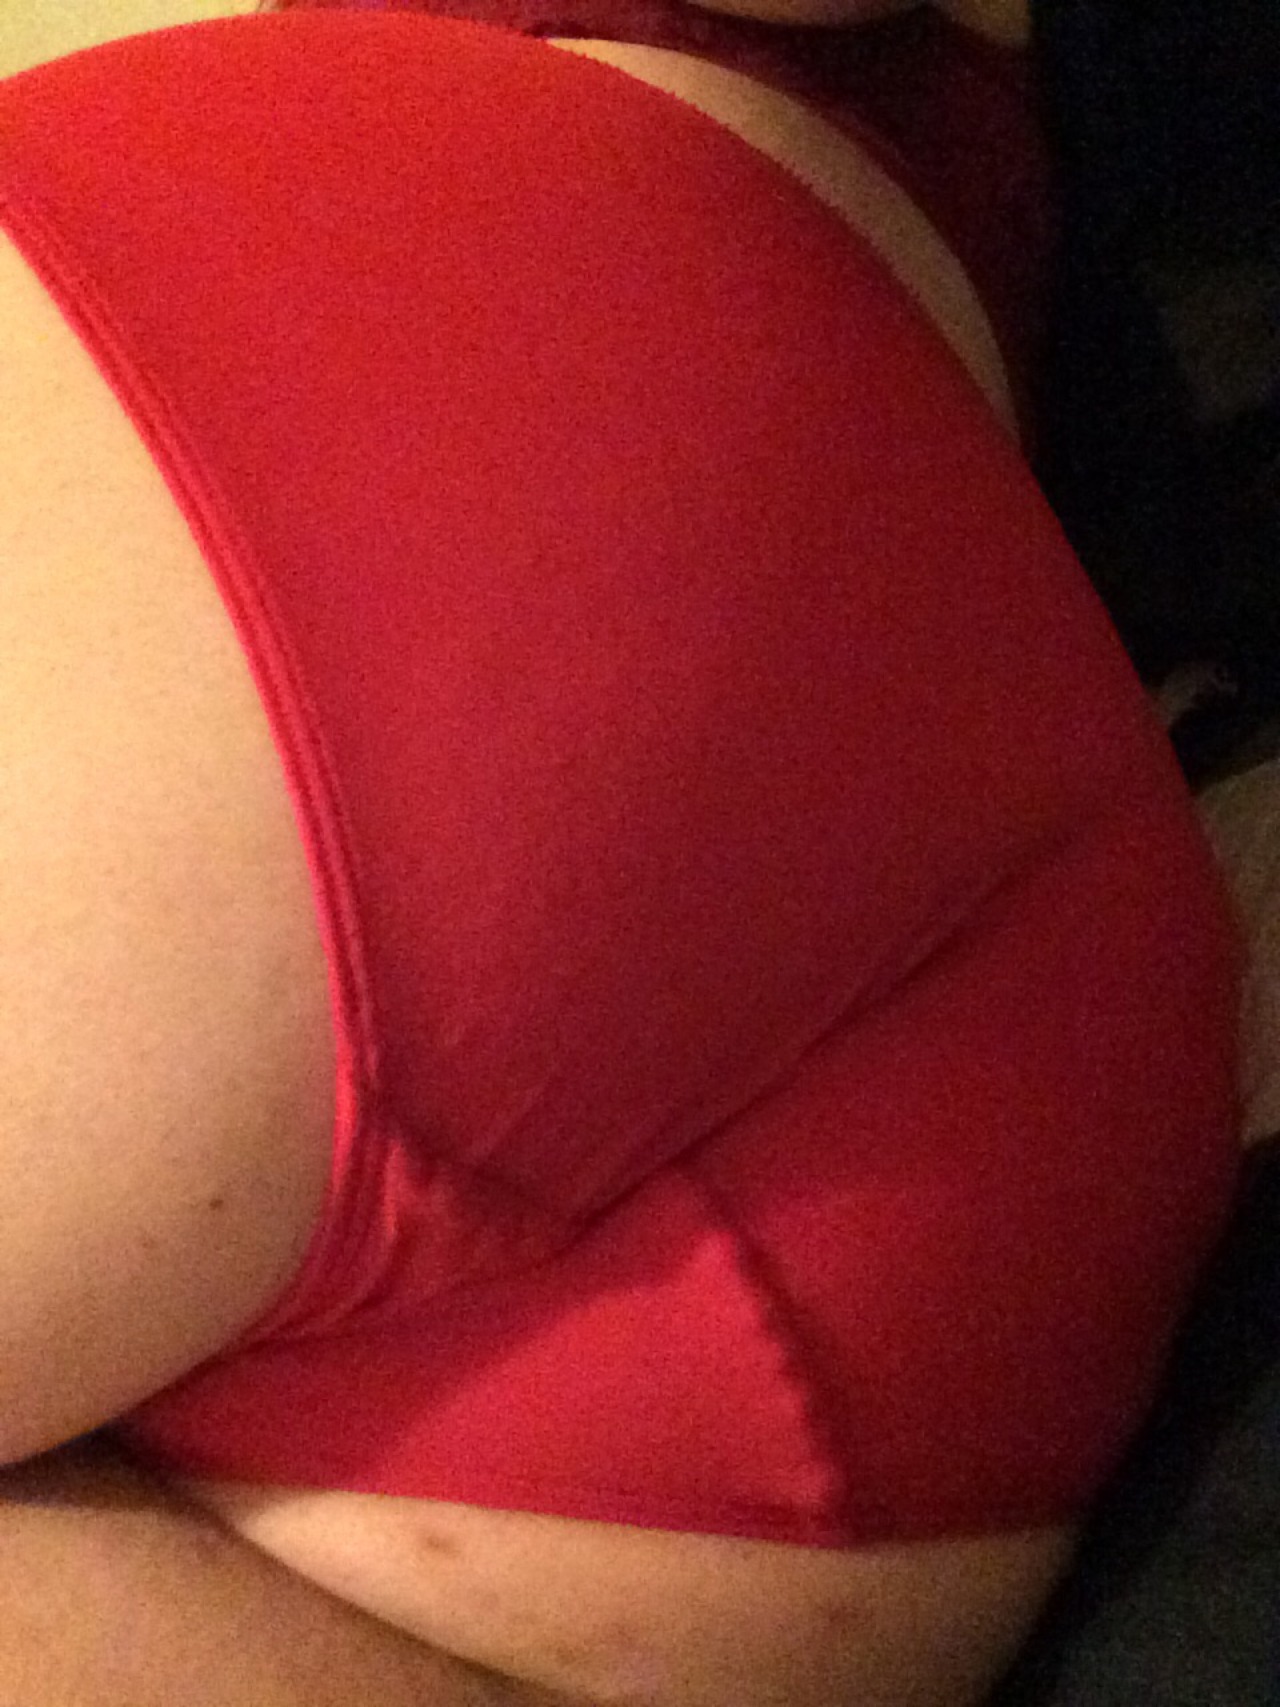 diary-dumpster:  Some of my favorite booty pics. My ass be looking fierce. Bite it.